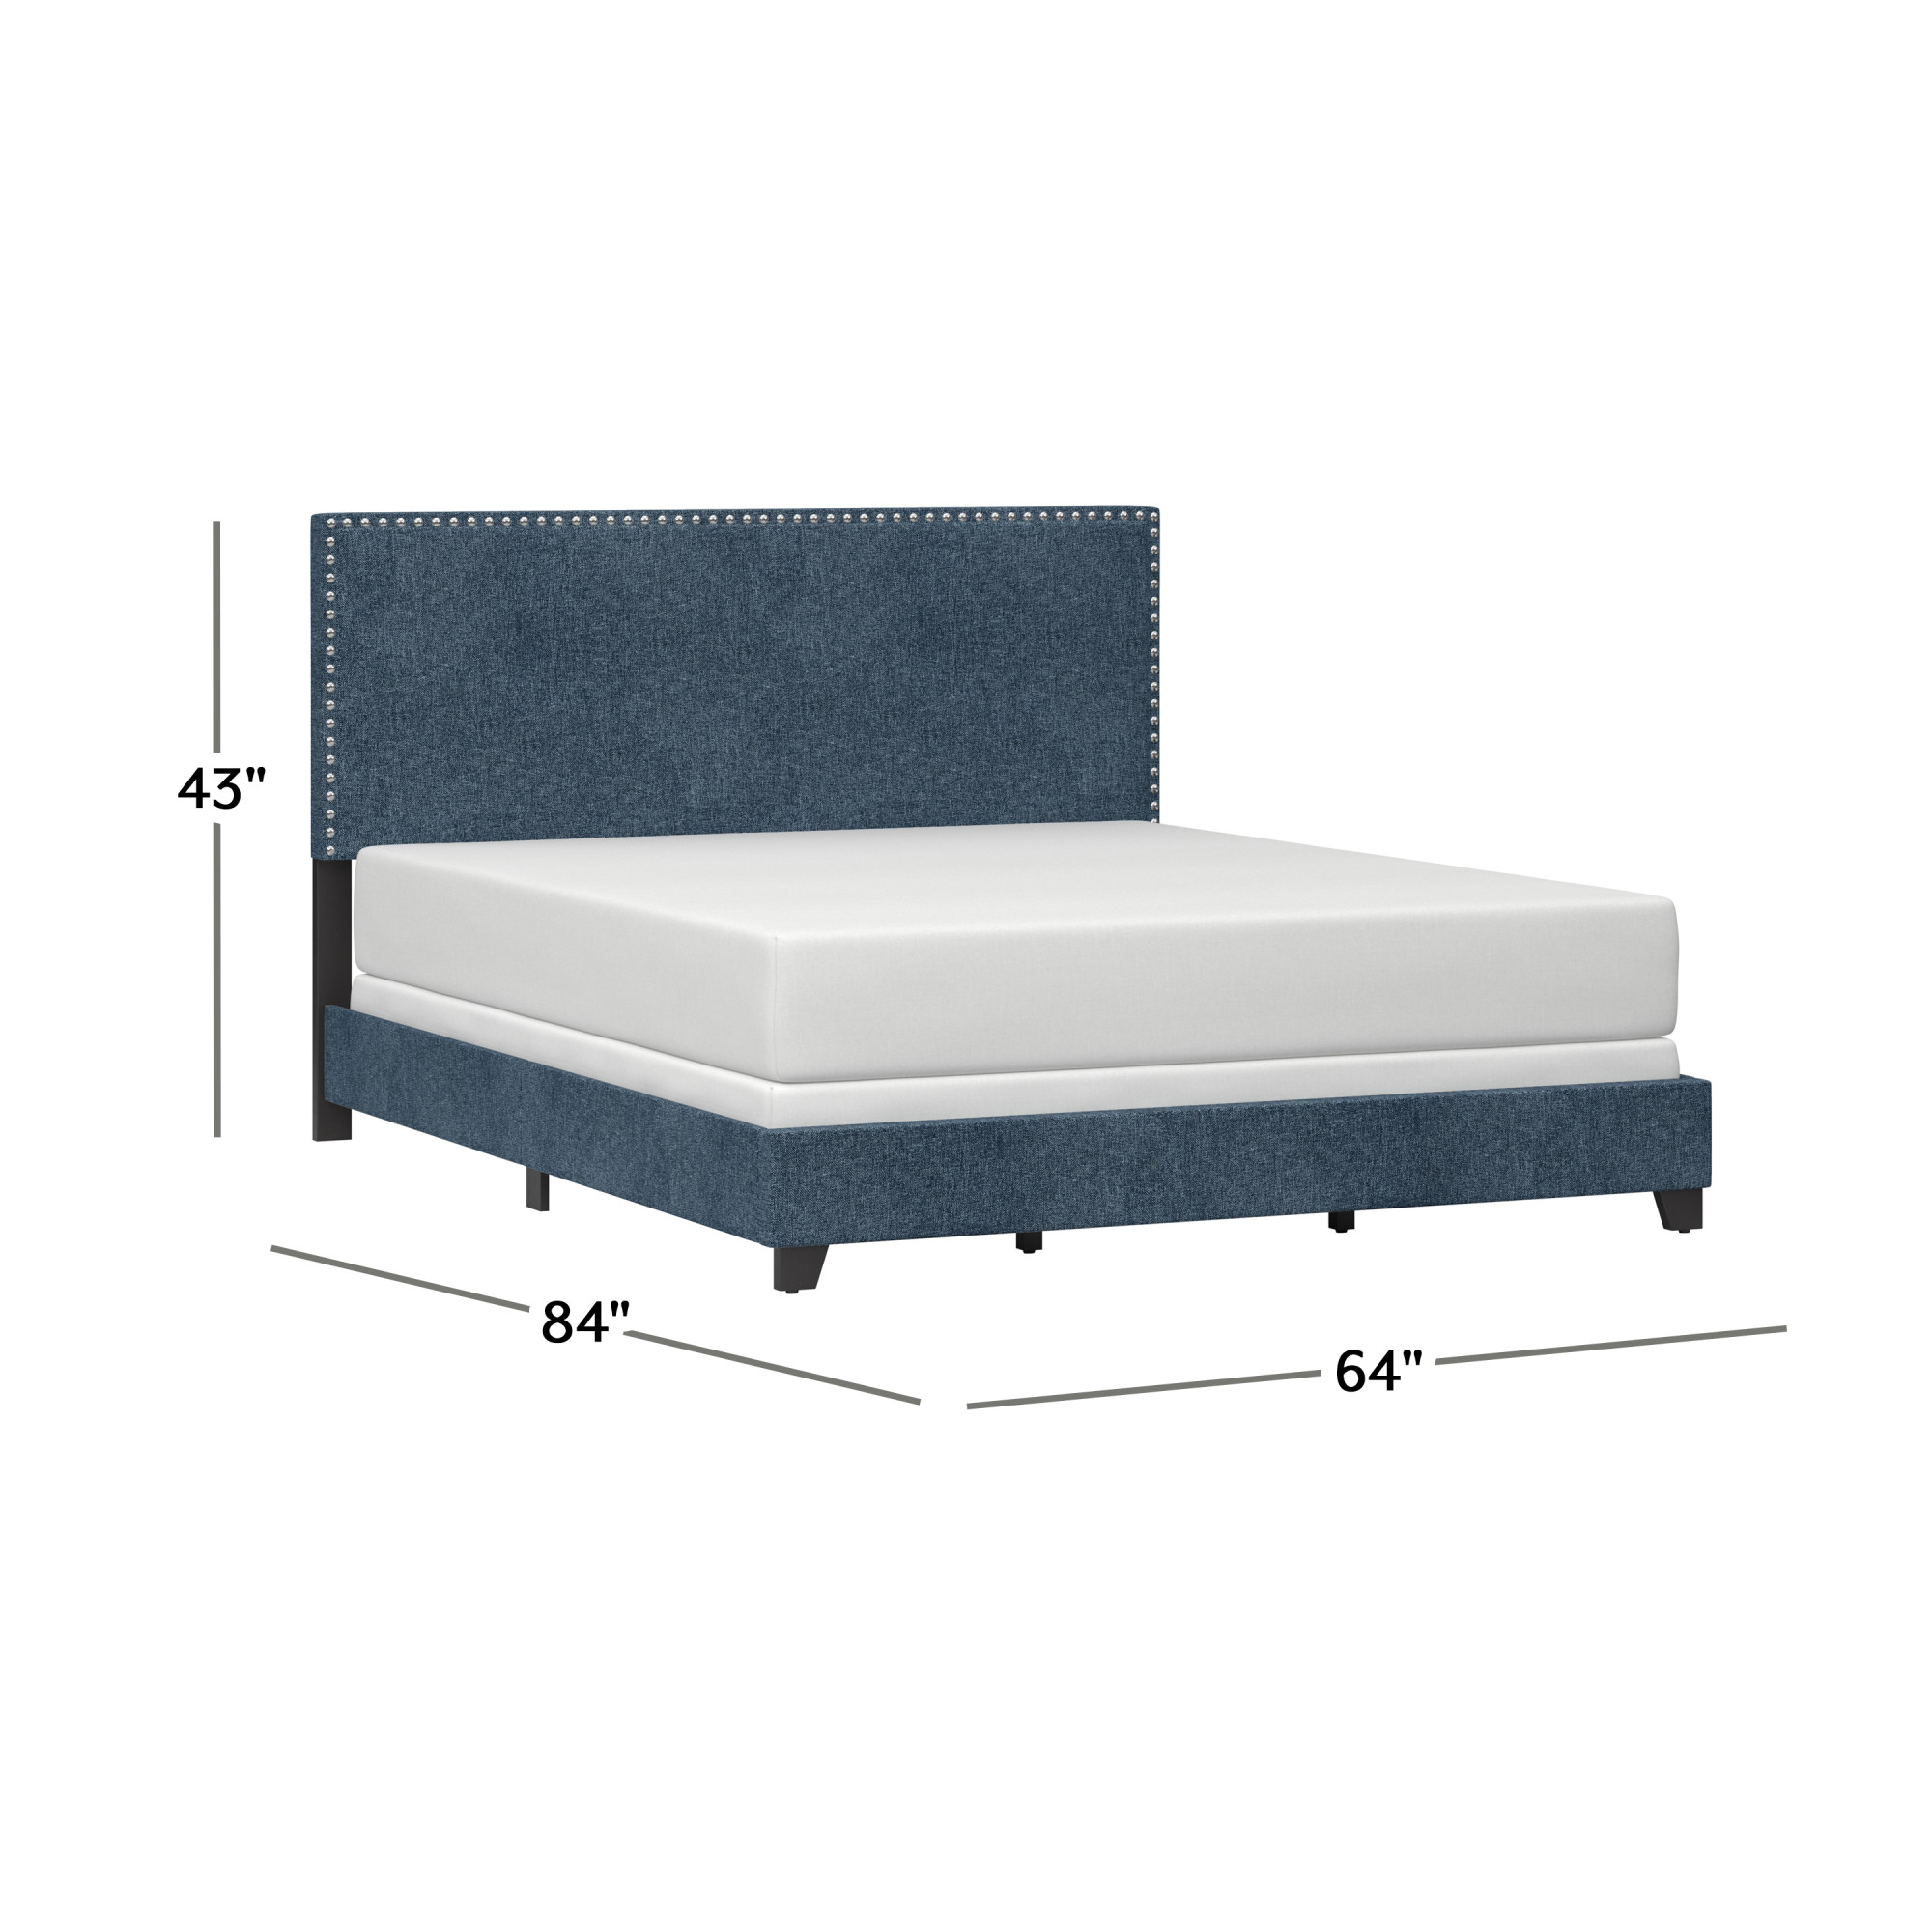 Willow Nailhead Trim Upholstered Queen Bed, Denim Fabric - image 4 of 17